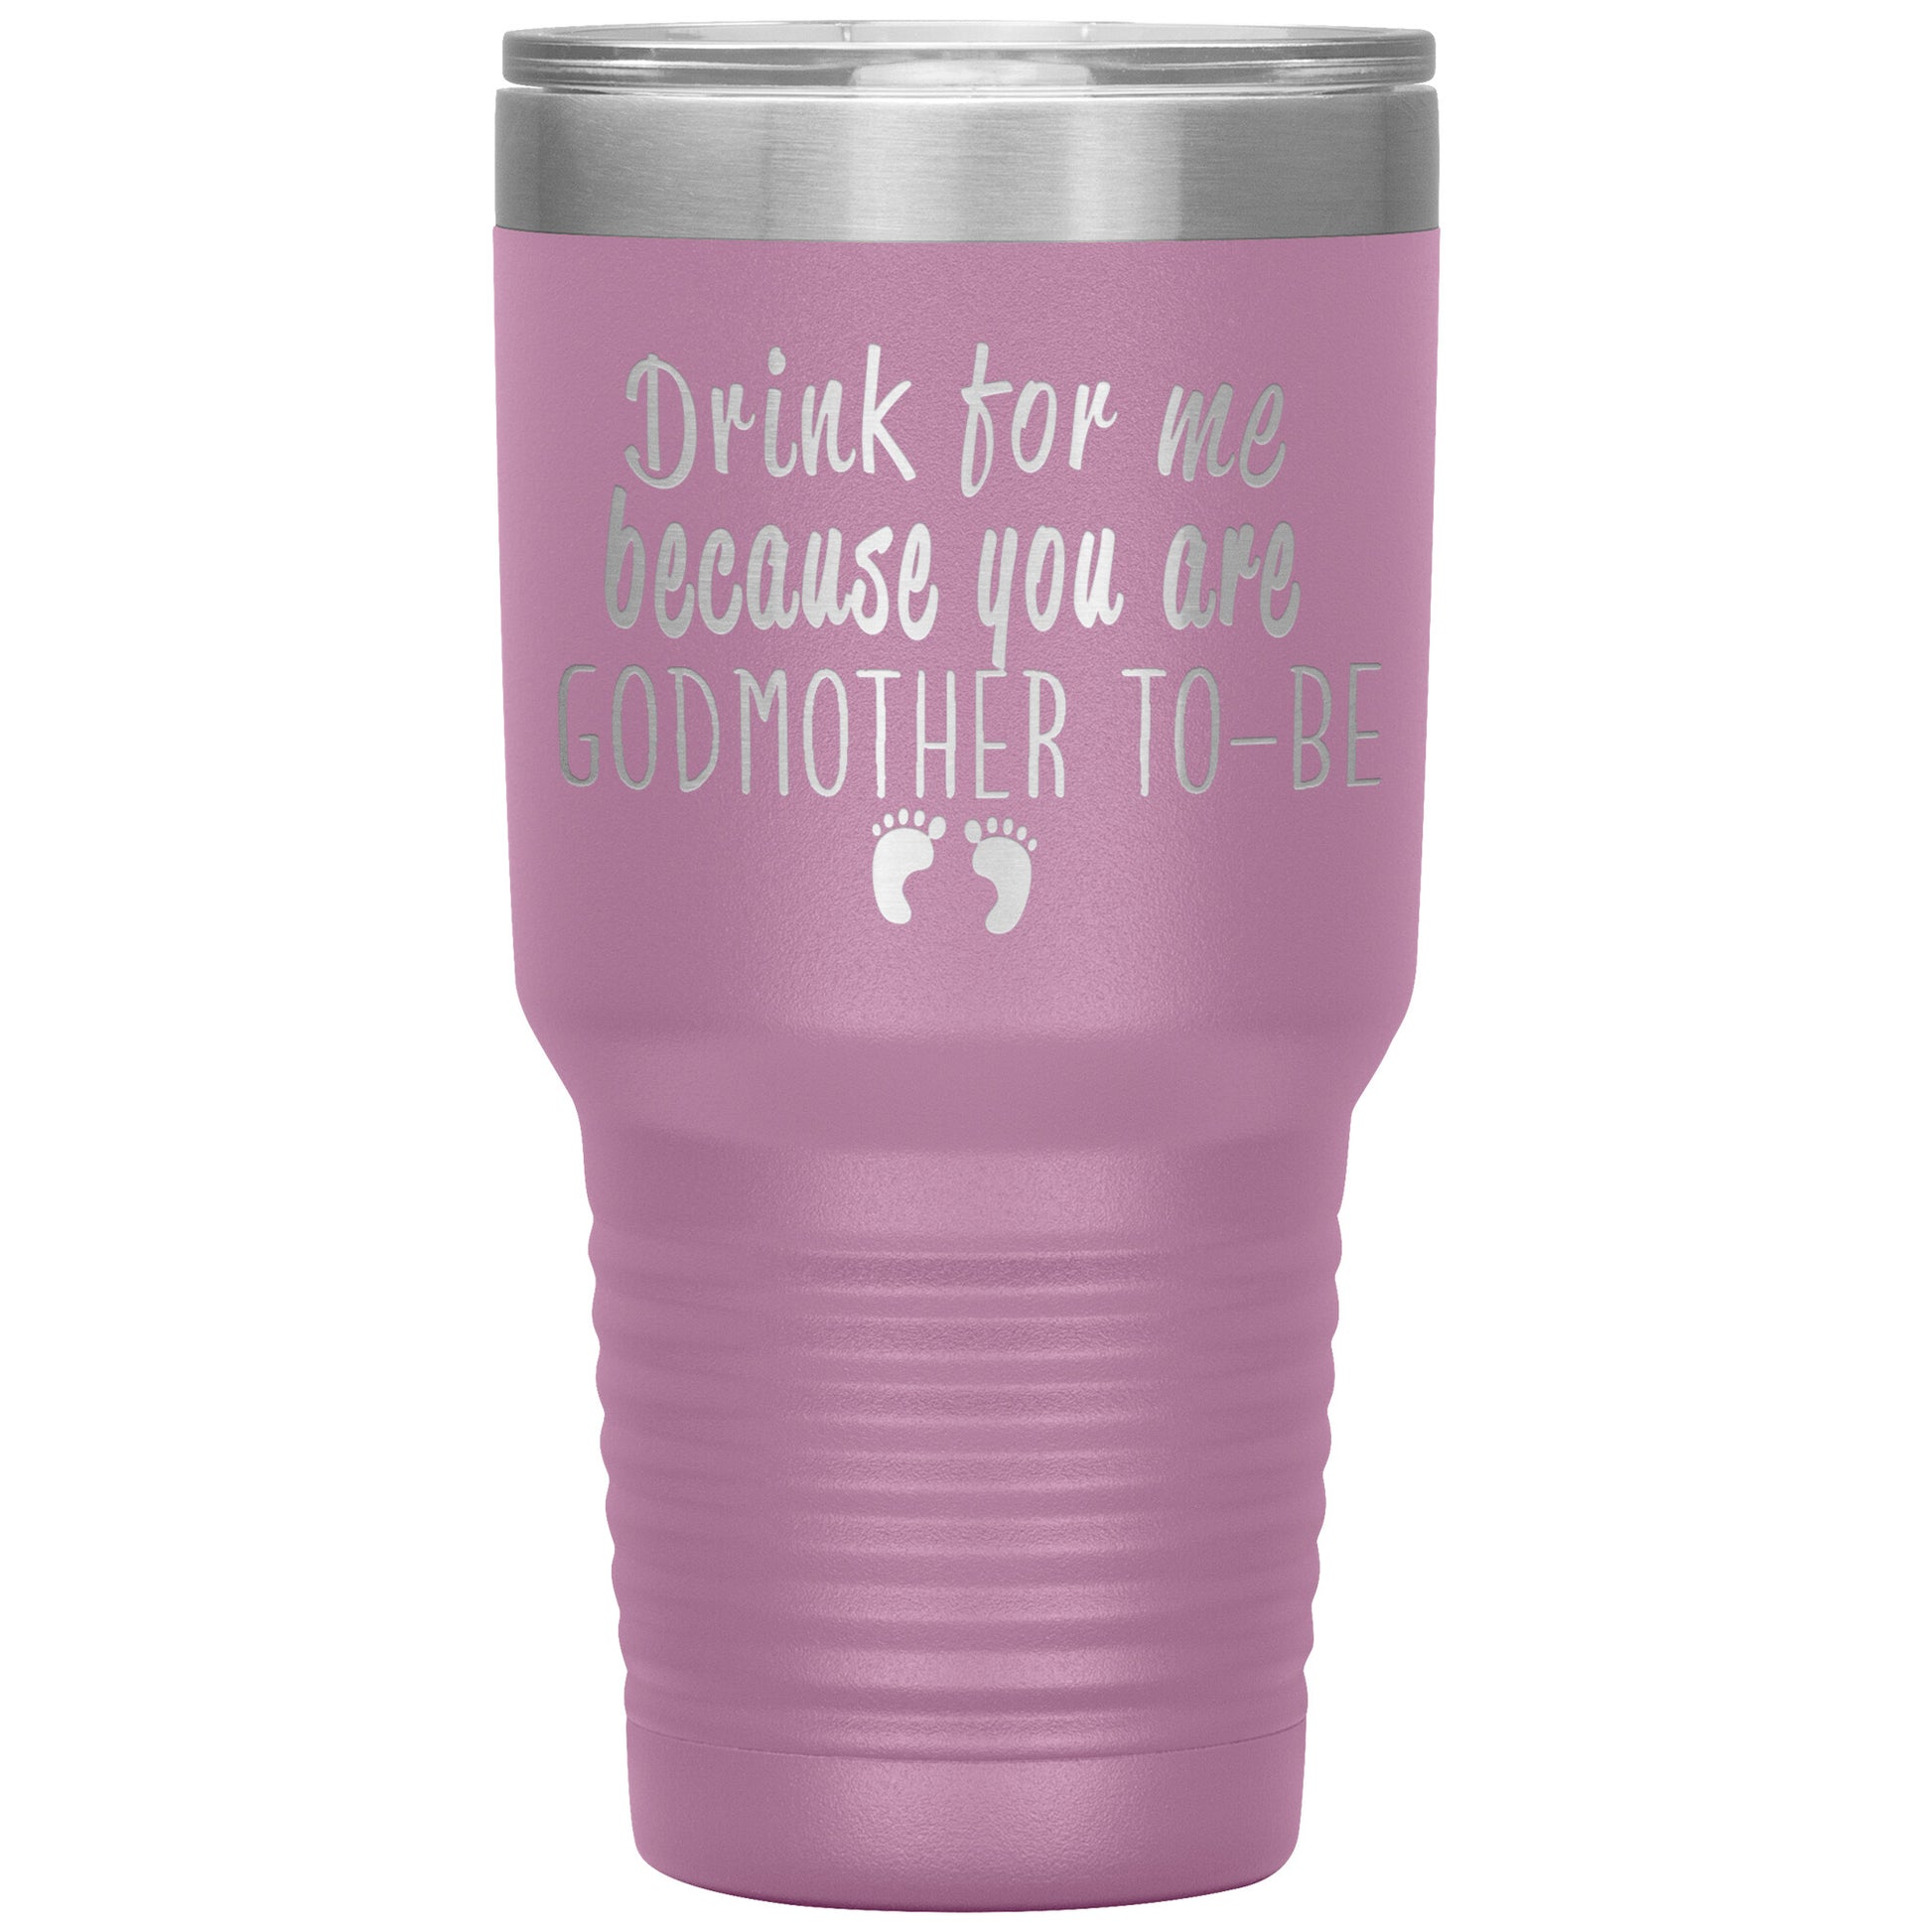 Drink For Me Godmother To Be Tumbler